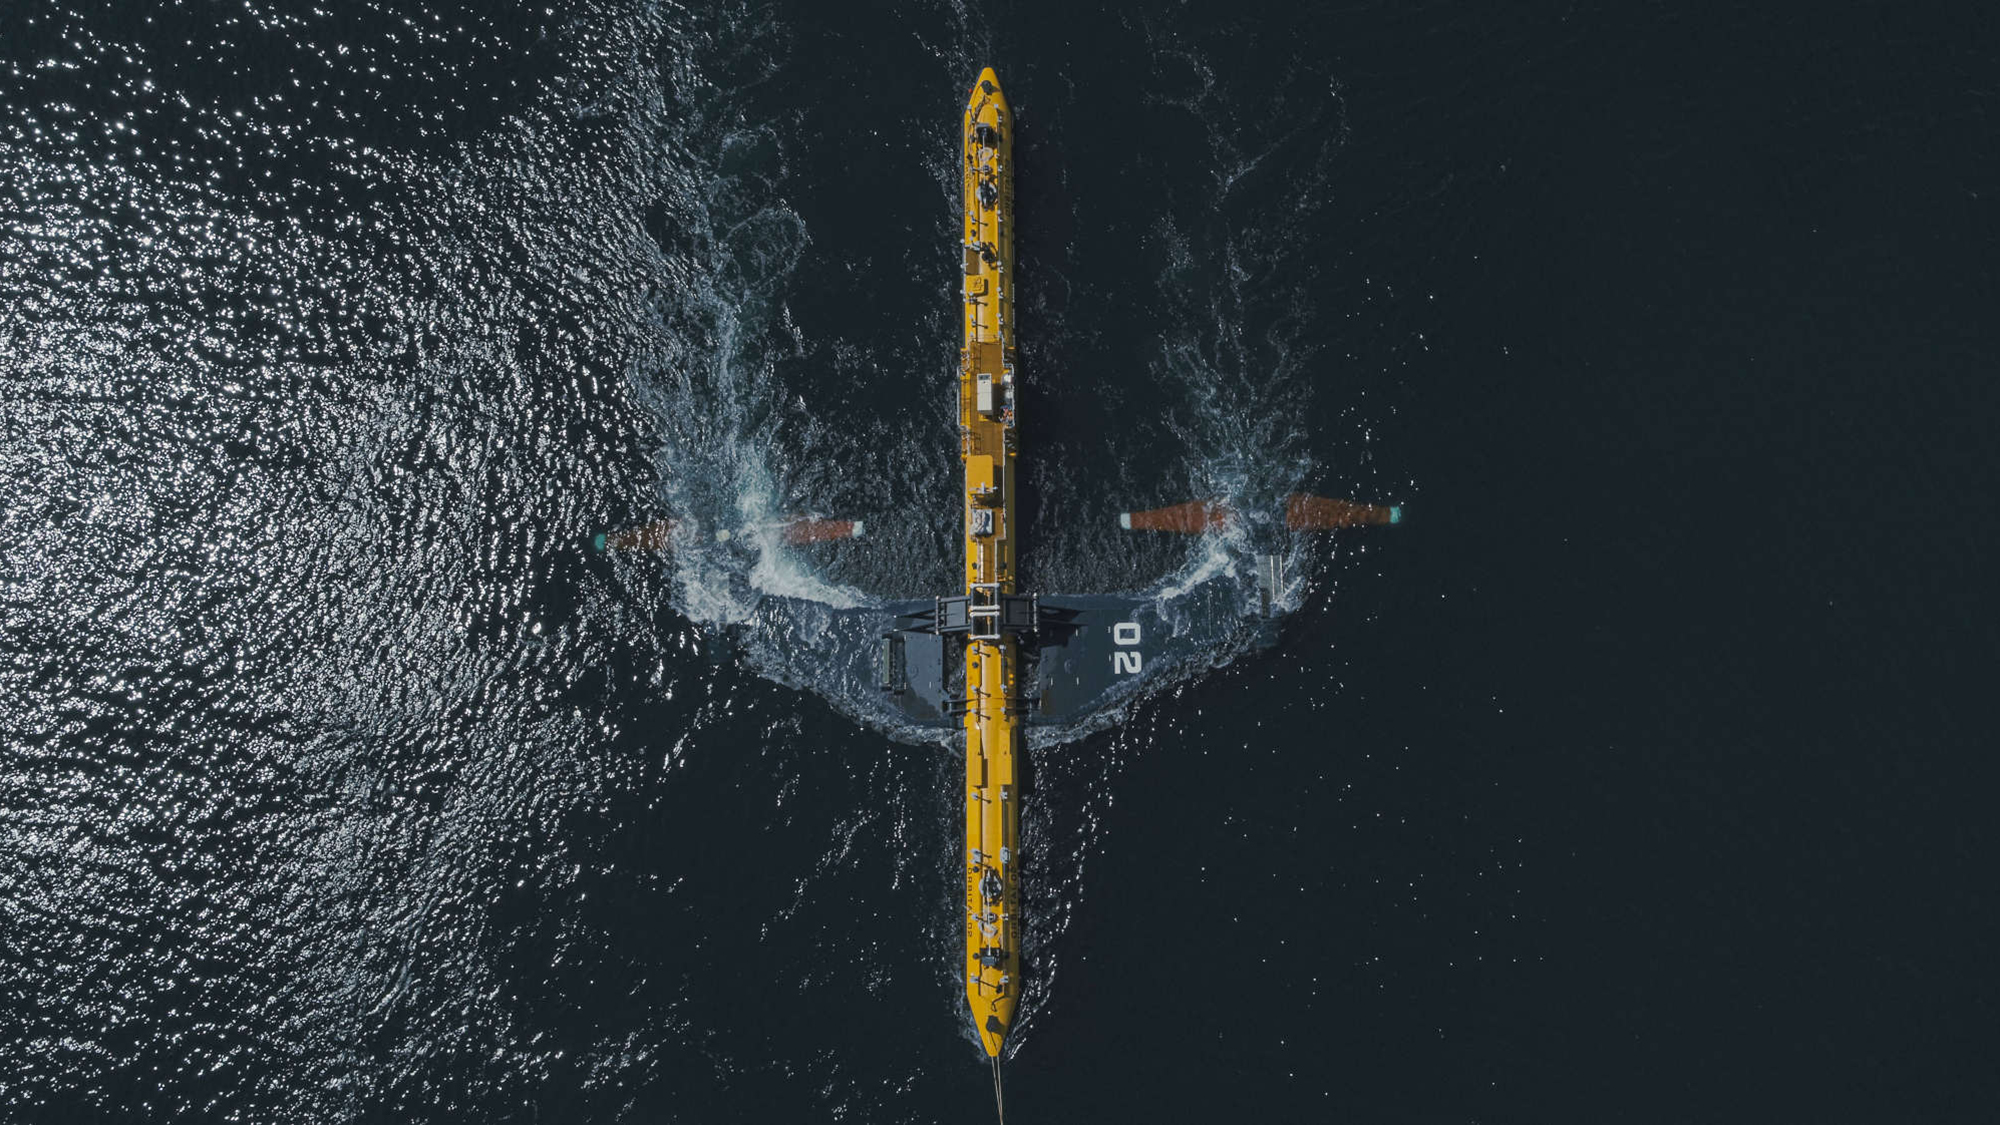 A tidal stream energy generator called the O2, made by Orbital Marine Power Ltd, extracts energy from the tides off the coast of Scotland and feeds it into the electric grid.